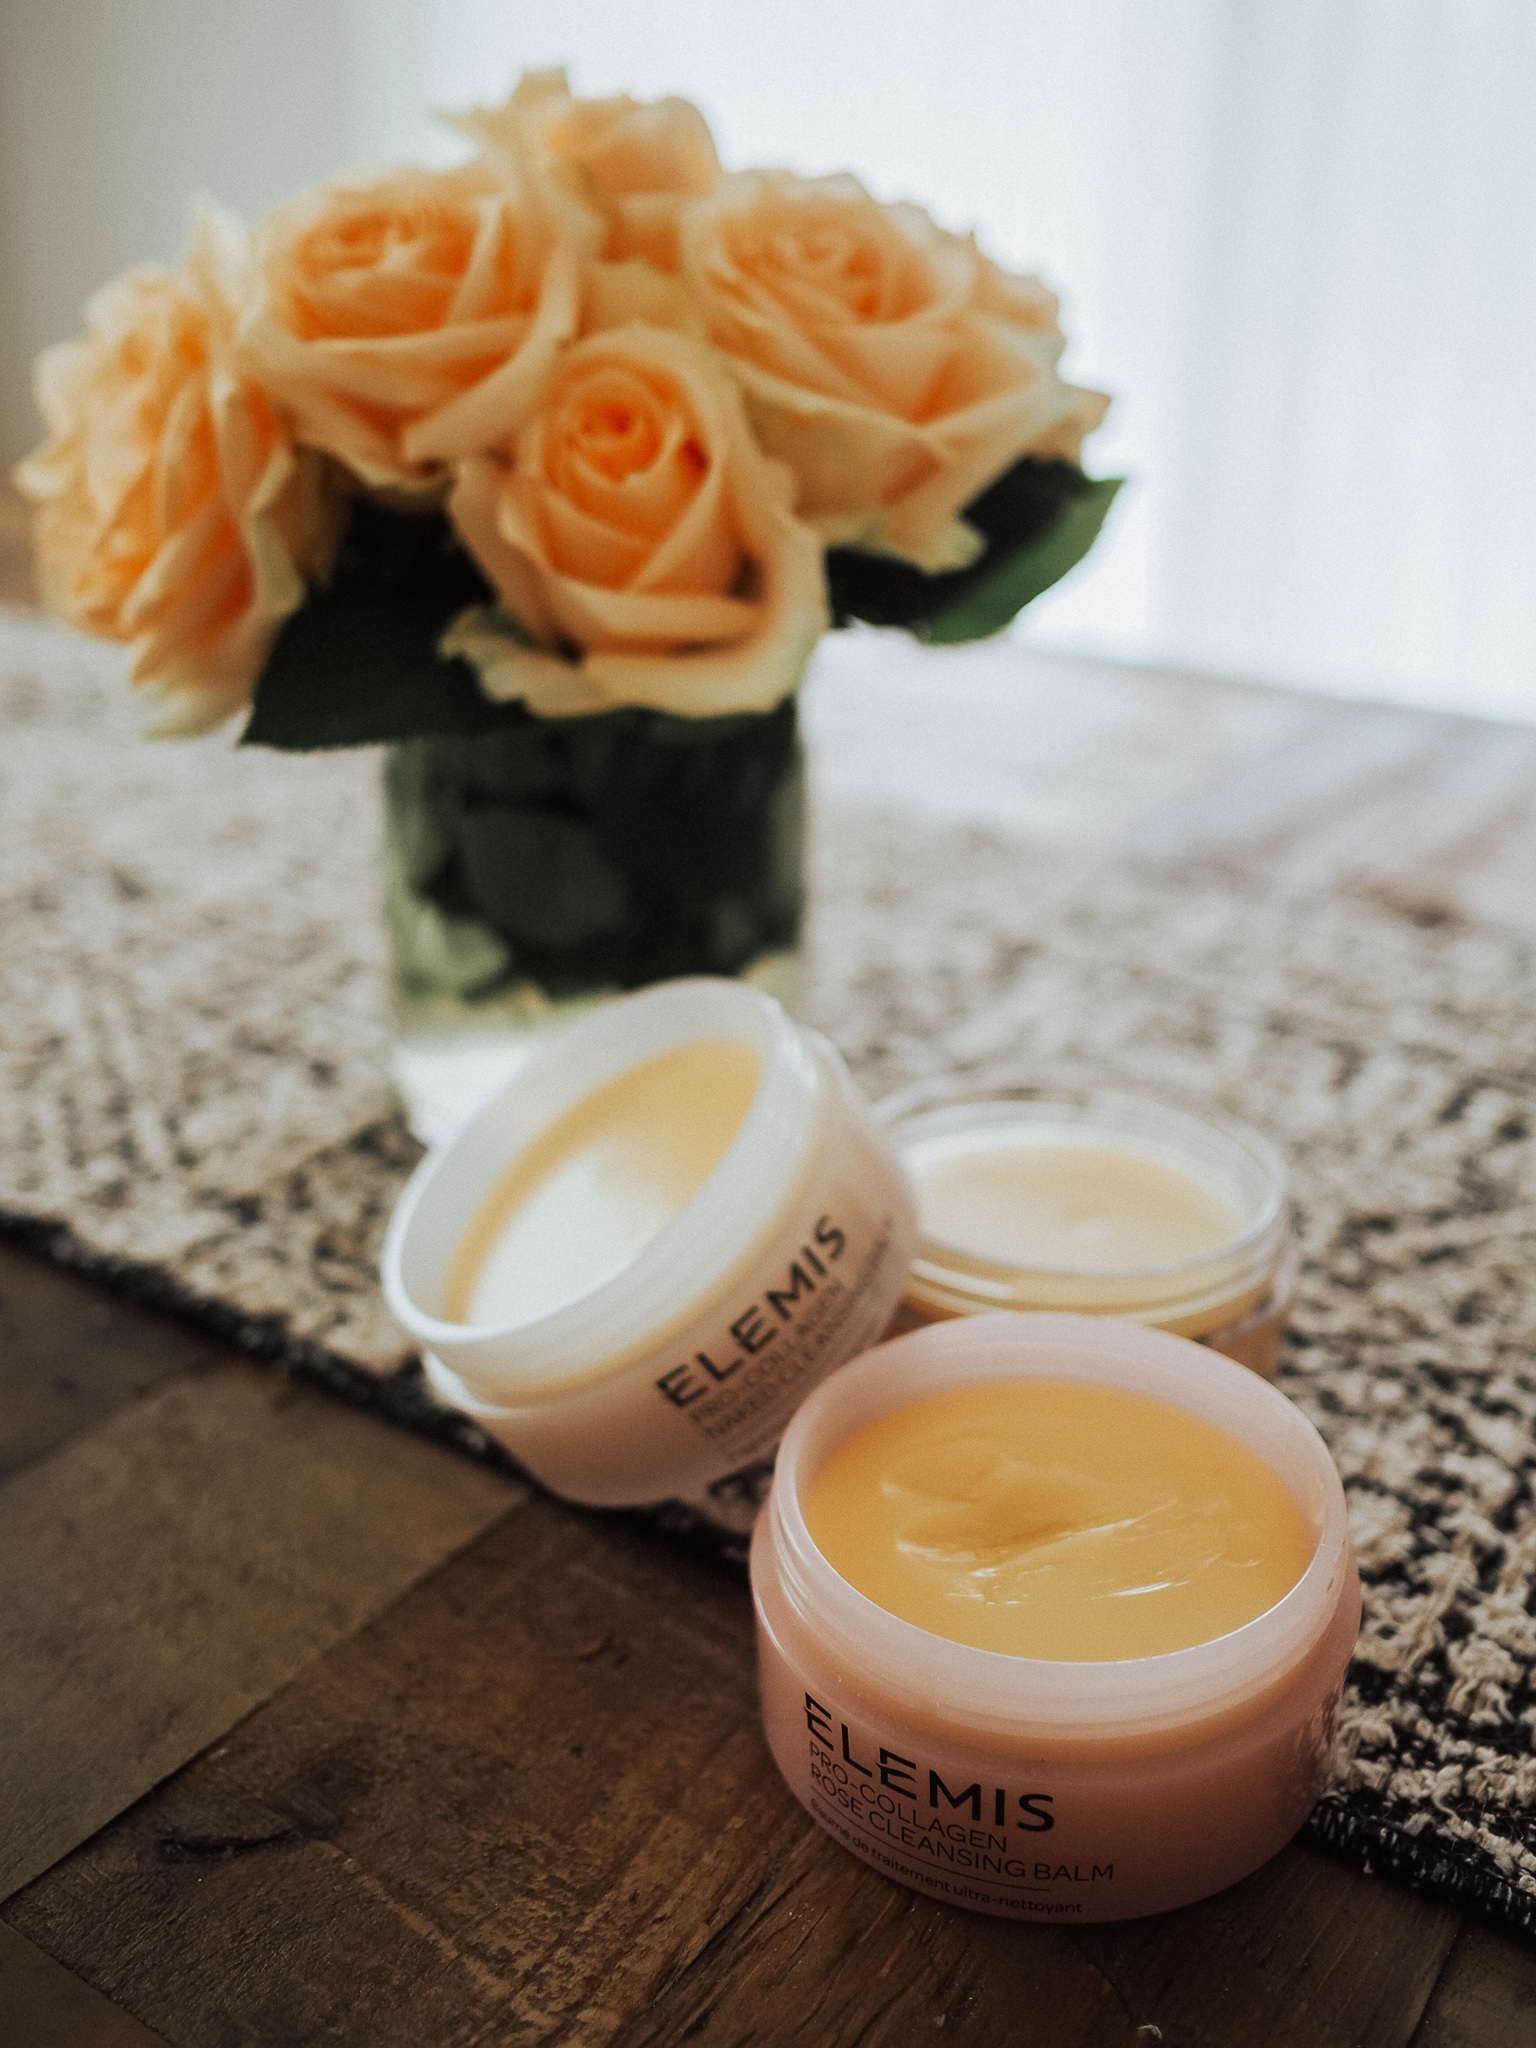 The Elemis cleansing balm line is hands down the best cleansing balm on the market - and Kelsey from B&B breaks down why.